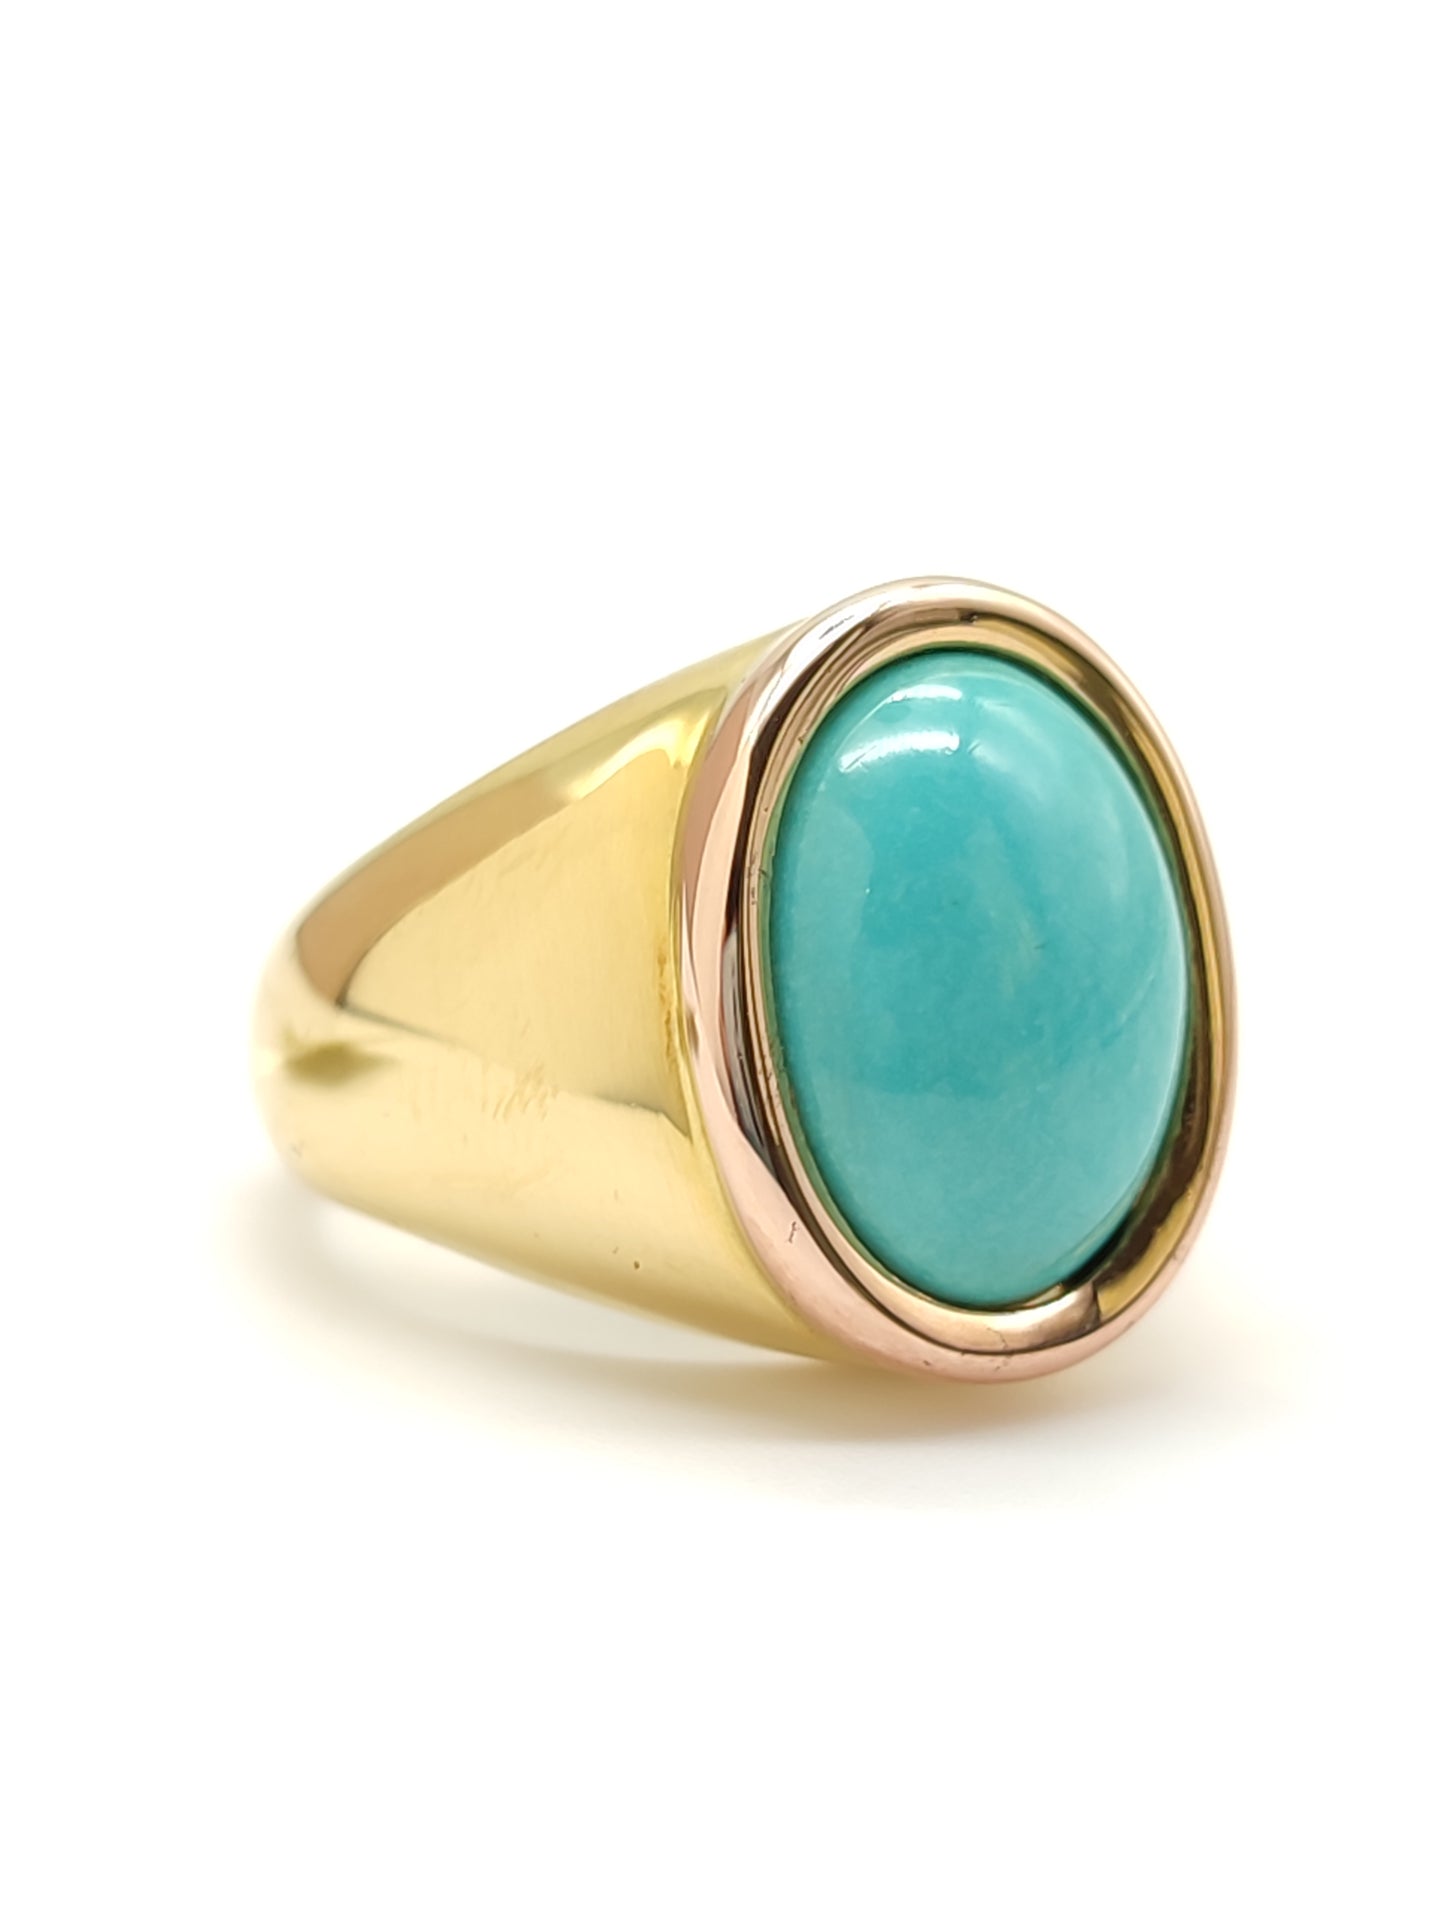 Pavan - Gold ring with turquoise